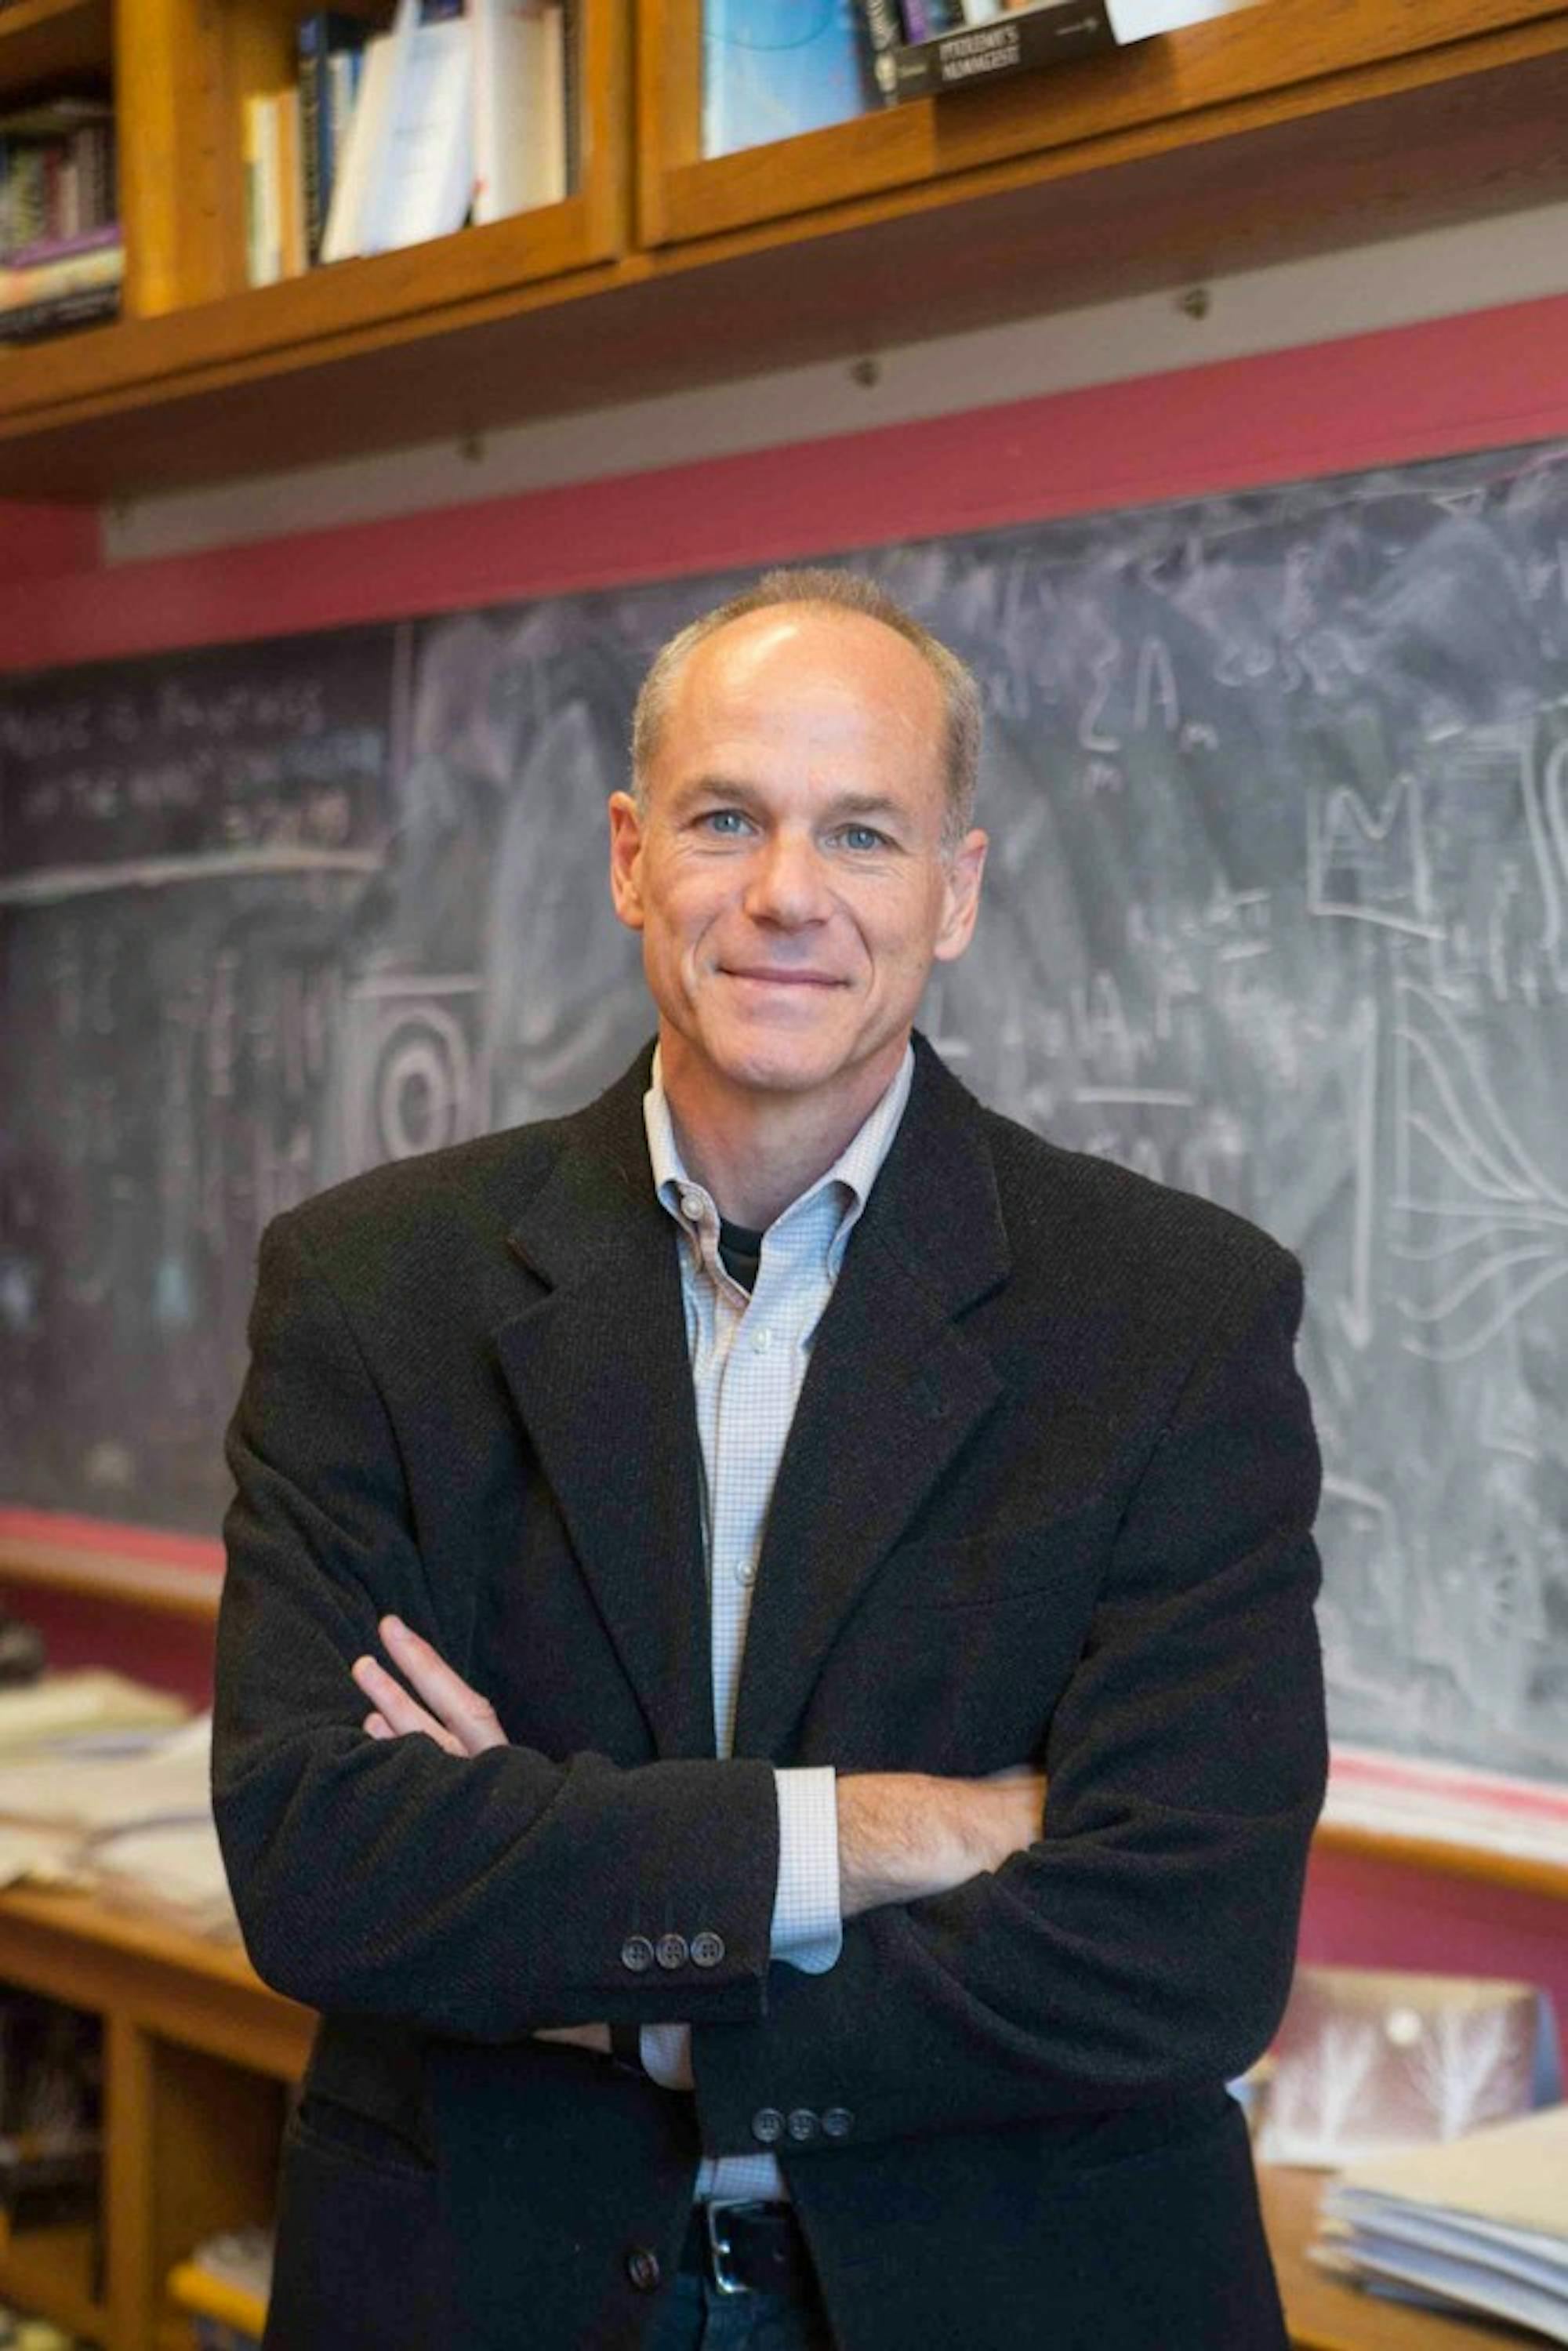 Professor of physics Marcelo Gleiser has taught at the College for 26 years.